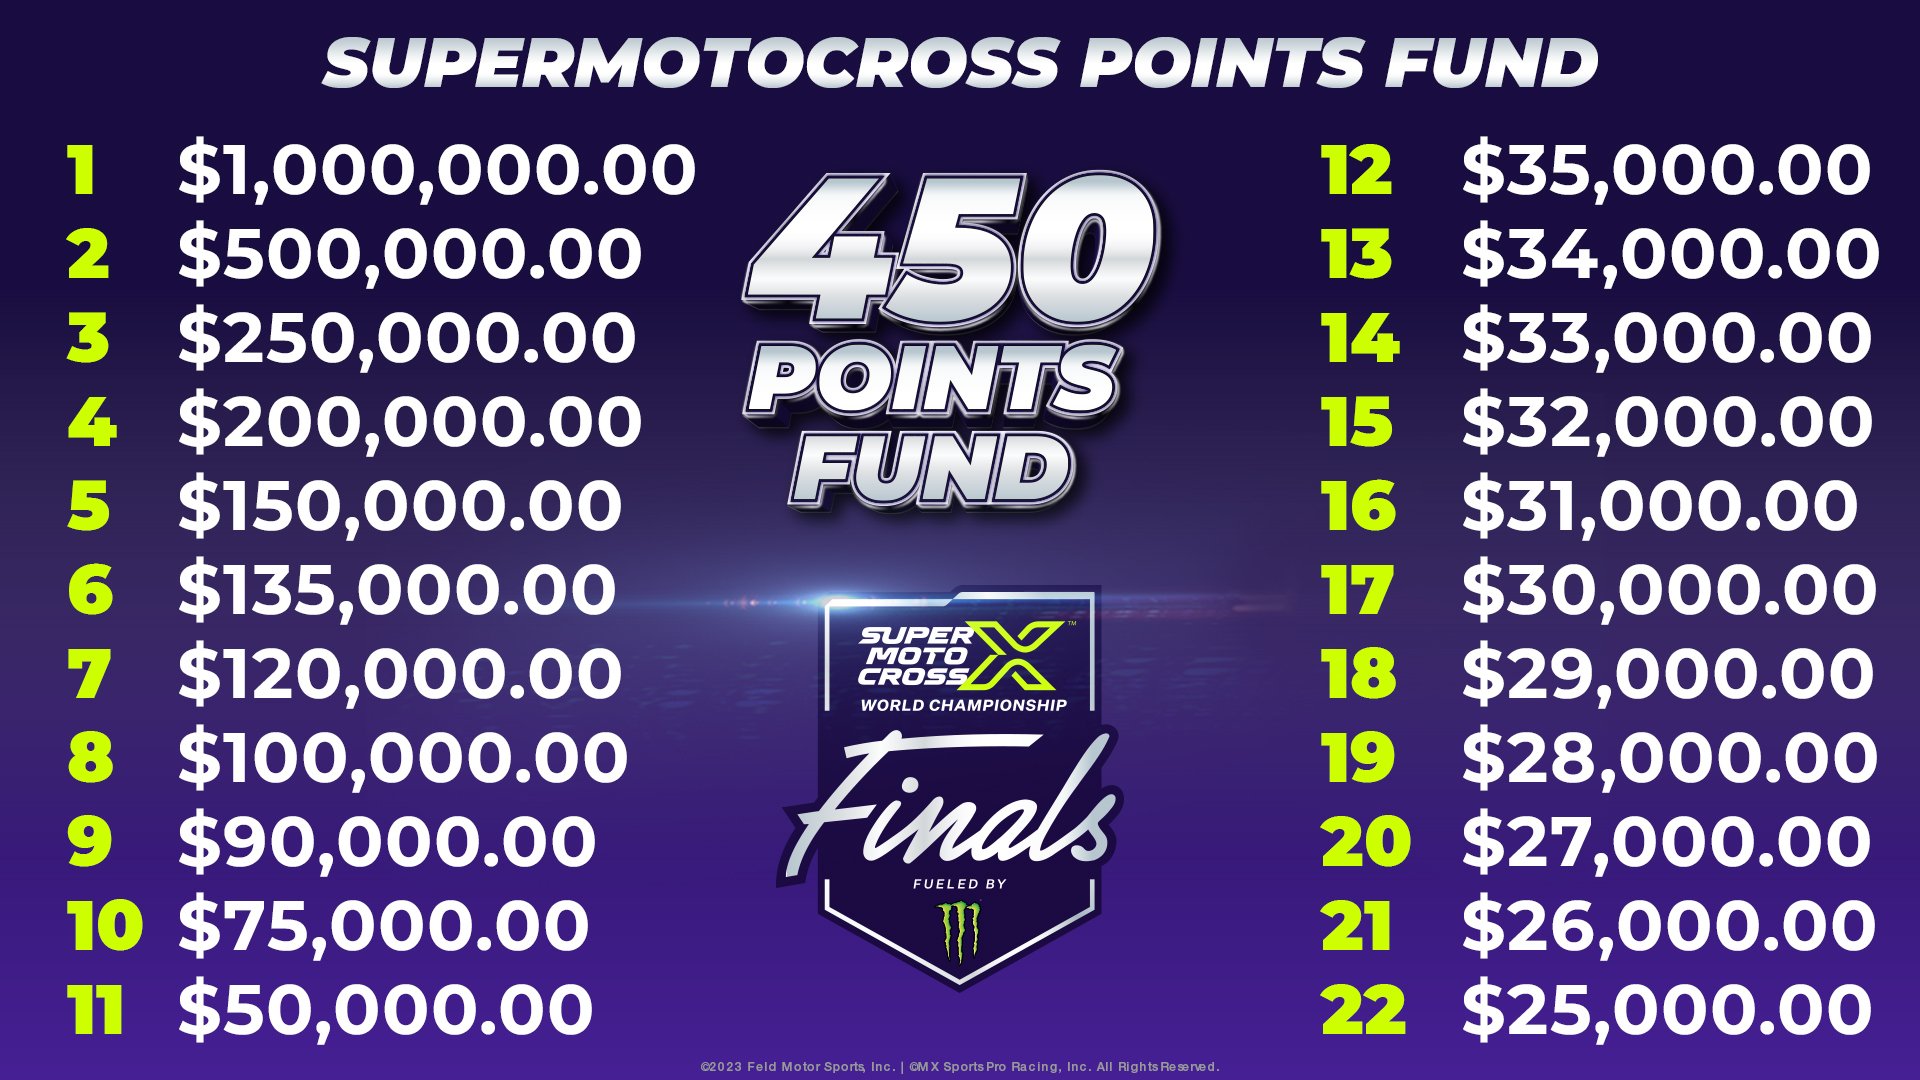 Image with 450 cash payouts. The 450cc class SMX Champion is guaranteed a seven-figure payday of $1 million for earning the most SMX points in the three-round SMX Playoffs and Final. Second place earns $500K, third place $250K, whilepositions four through eight still pay in the six figures. Ninth position is worth $90K while a tenth-place finish will still earn a considerable $75K. Positions 11 through 22 range from $50K to $25K. 